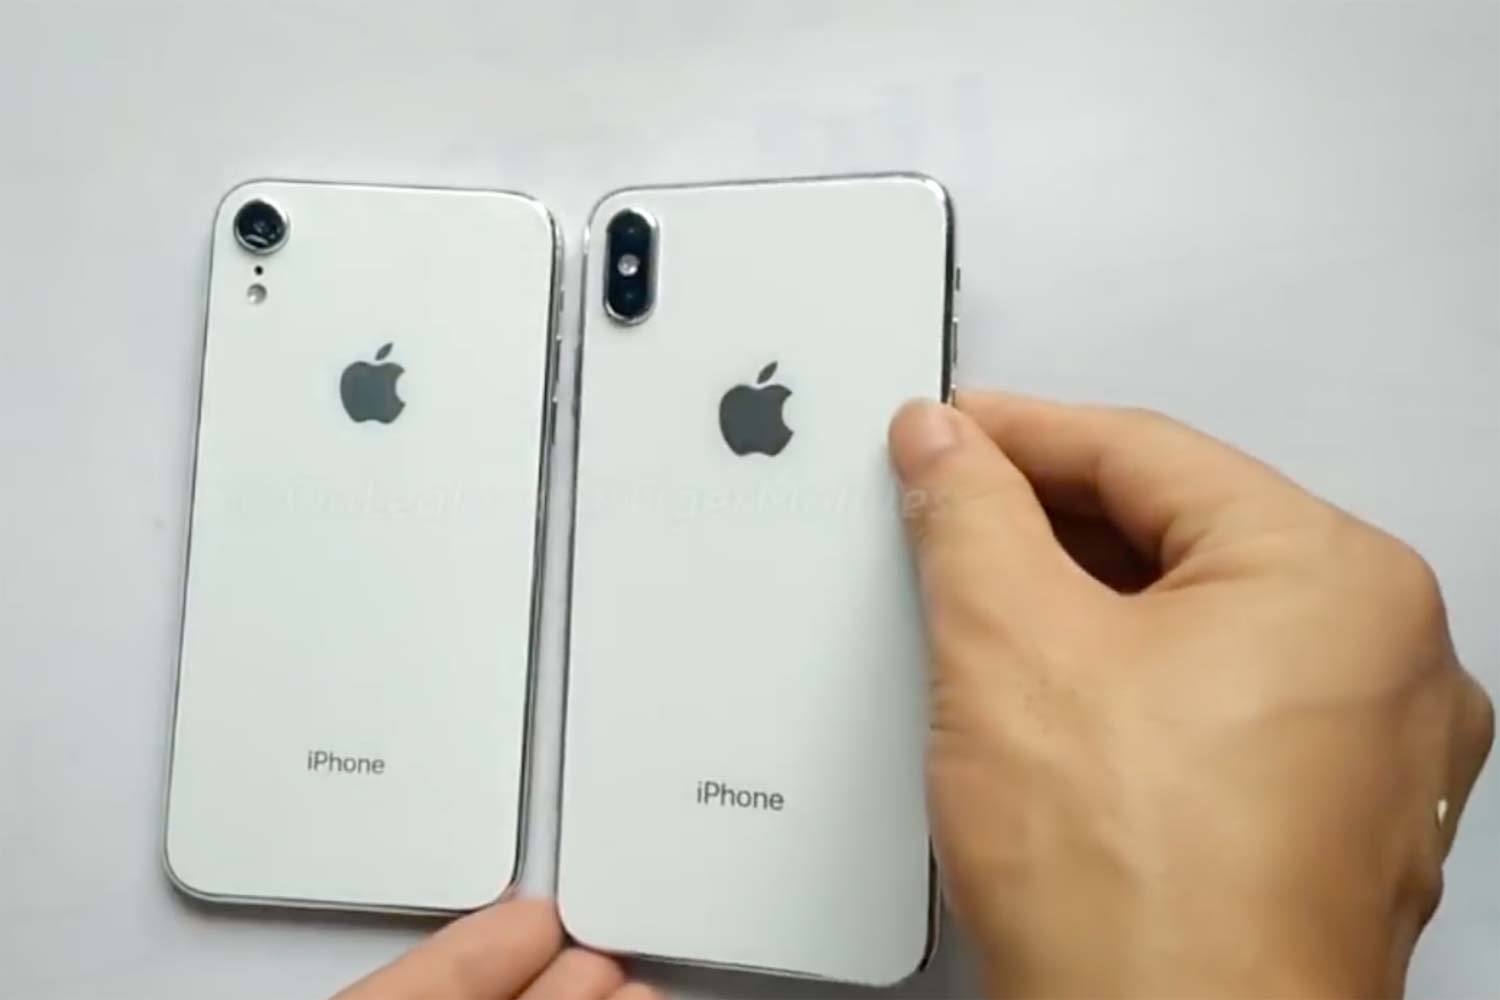 iPhone X Plus and iPhone 9 Prototypes - Hands on first look 